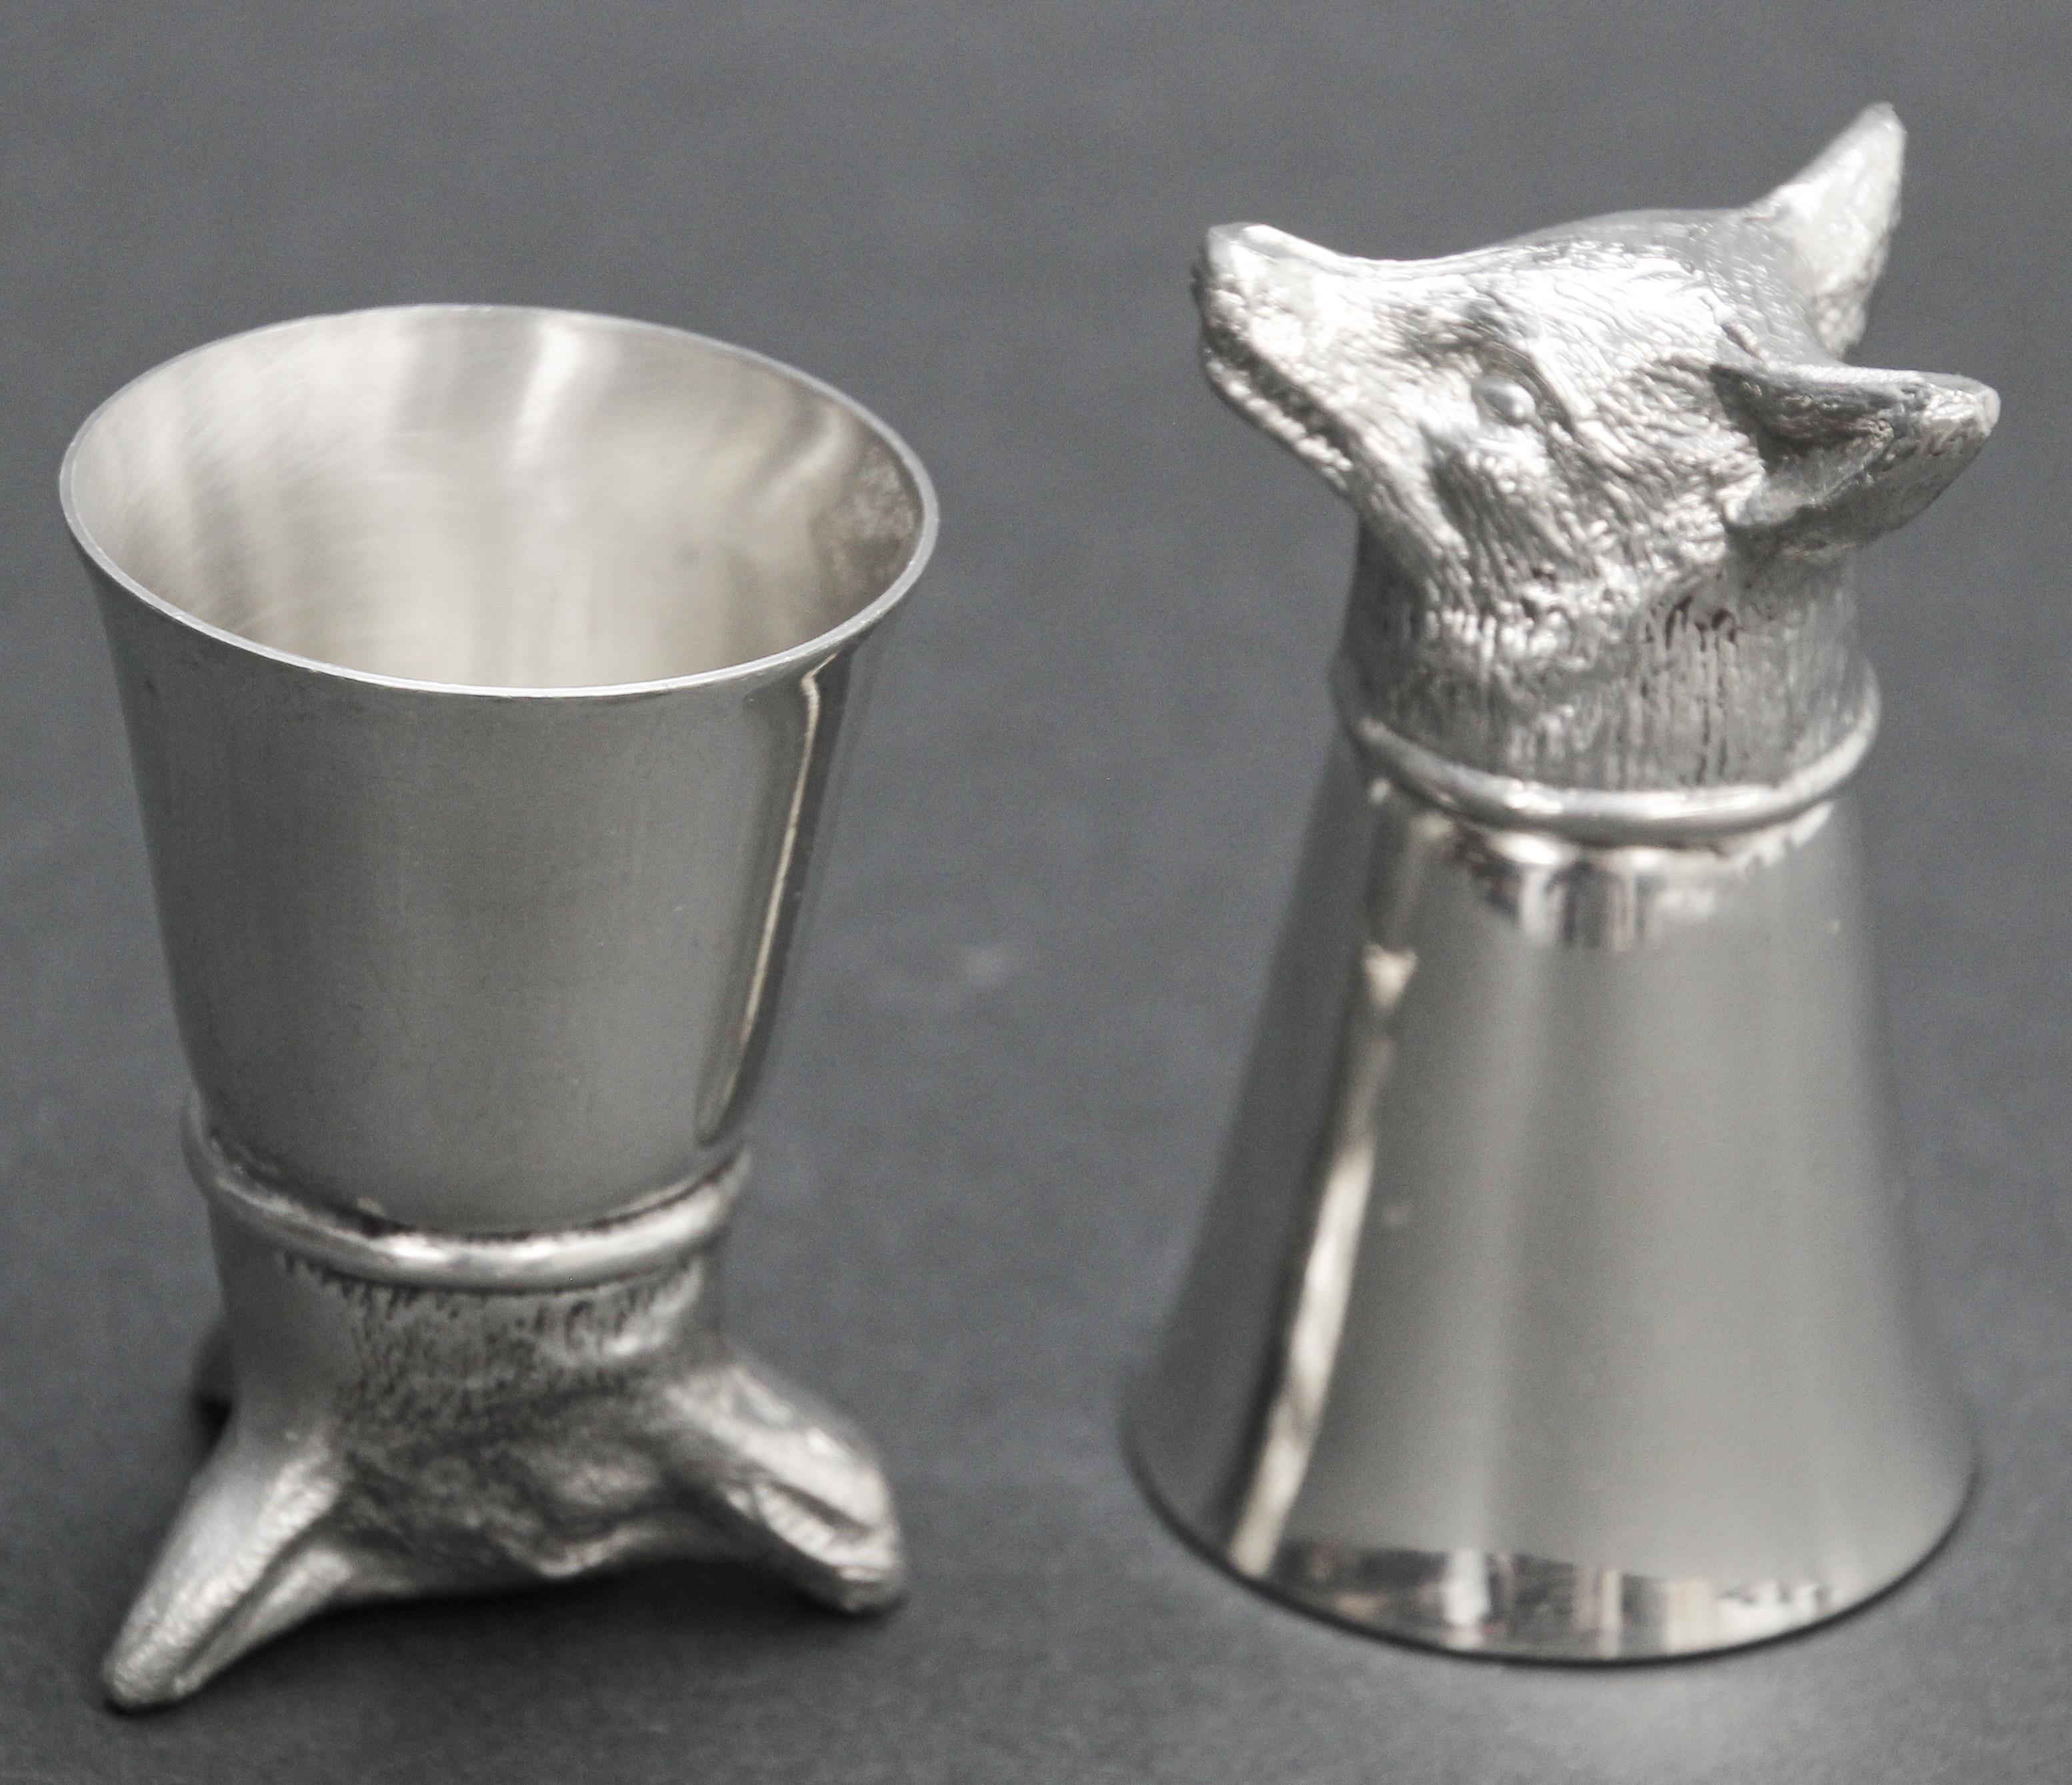 Classic Elizabeth II style stirrup cups, is of plain beaker form with a cast foxes head to one end.
Set of two playful stirrup cups from the 1970s.
Gorgeous stirrup cup adorned with a hand-carved fox head on its base. 
They balance with the